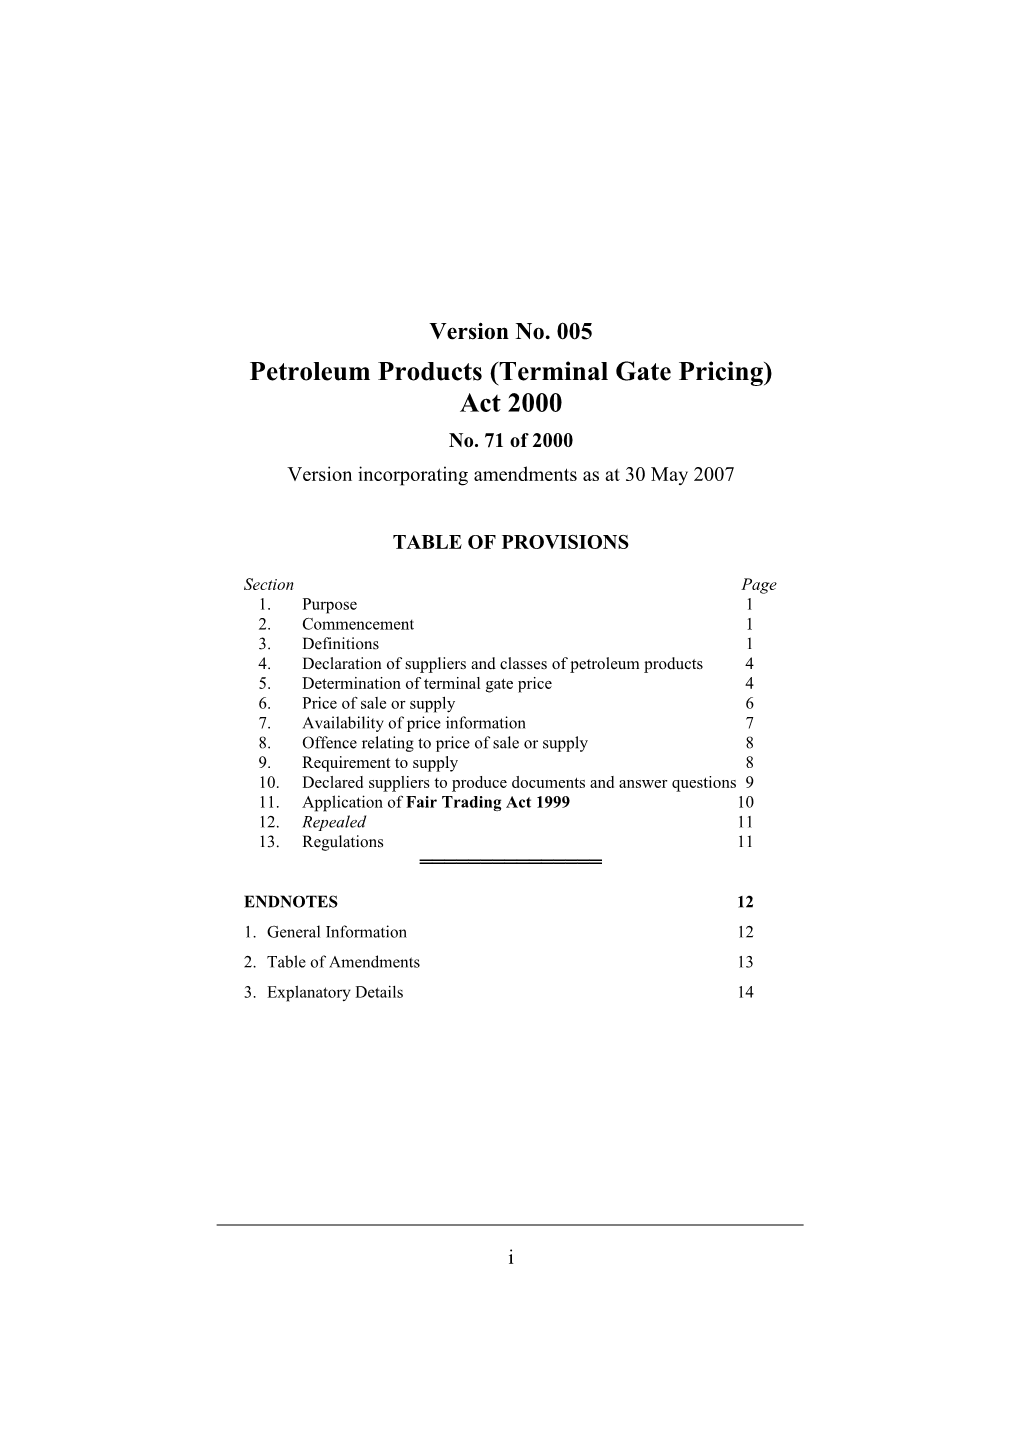 Petroleum Products (Terminal Gate Pricing) Act 2000